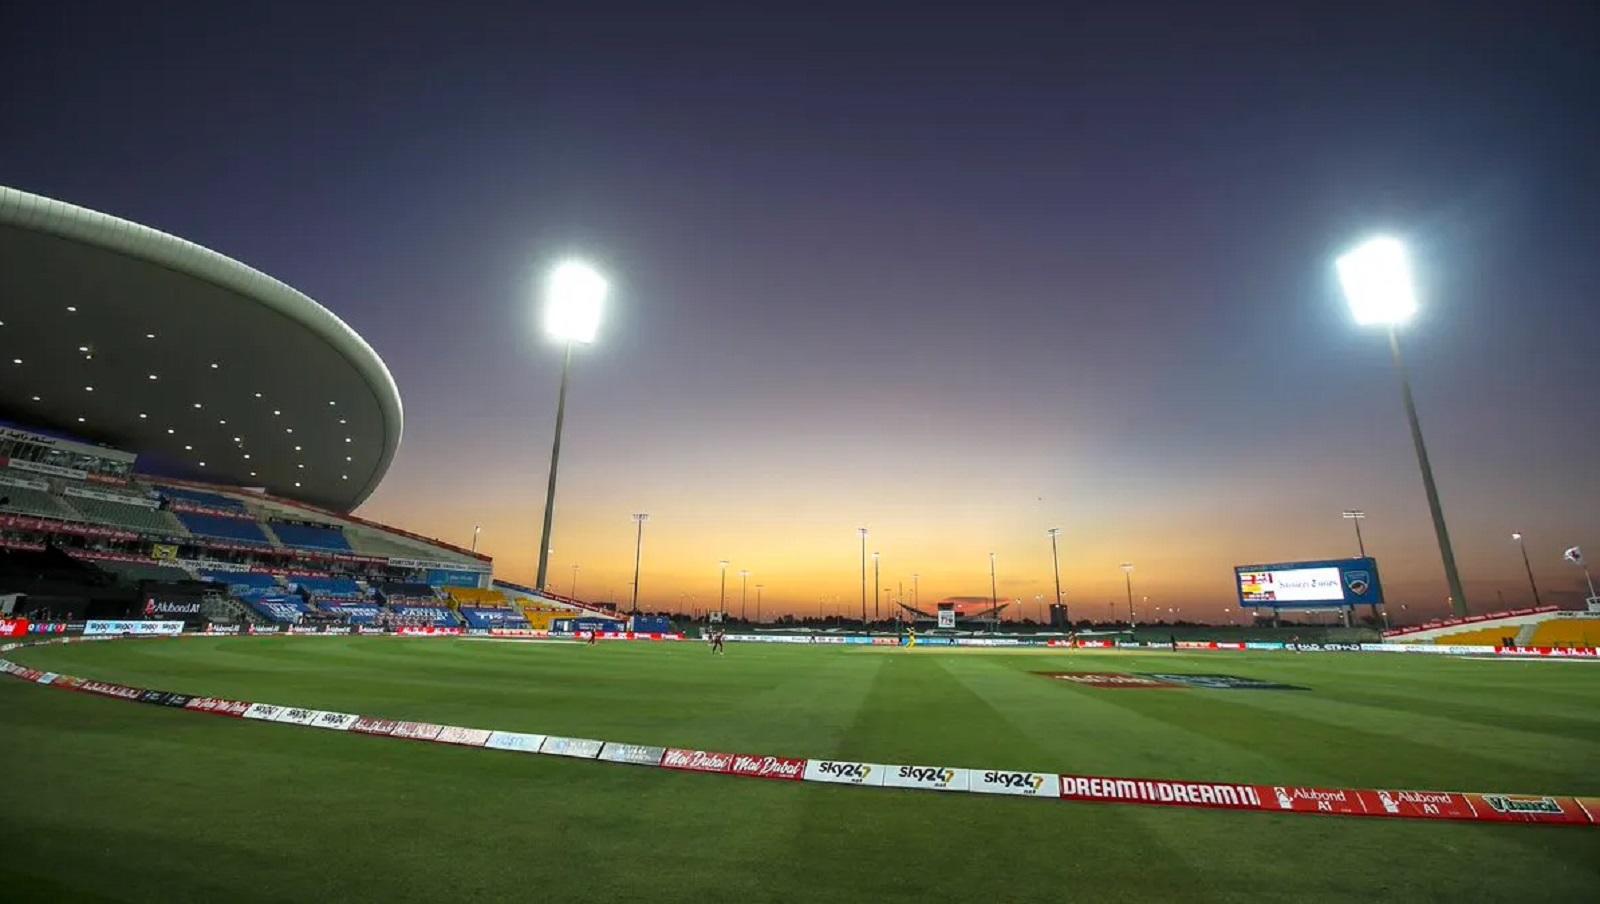 Abu Dhabi T10 League 2022 Live streaming Details Where to Watch LIVE on TV? Channels, Teams, Squads, Fixtures, Formats, Icon players and All you need to know